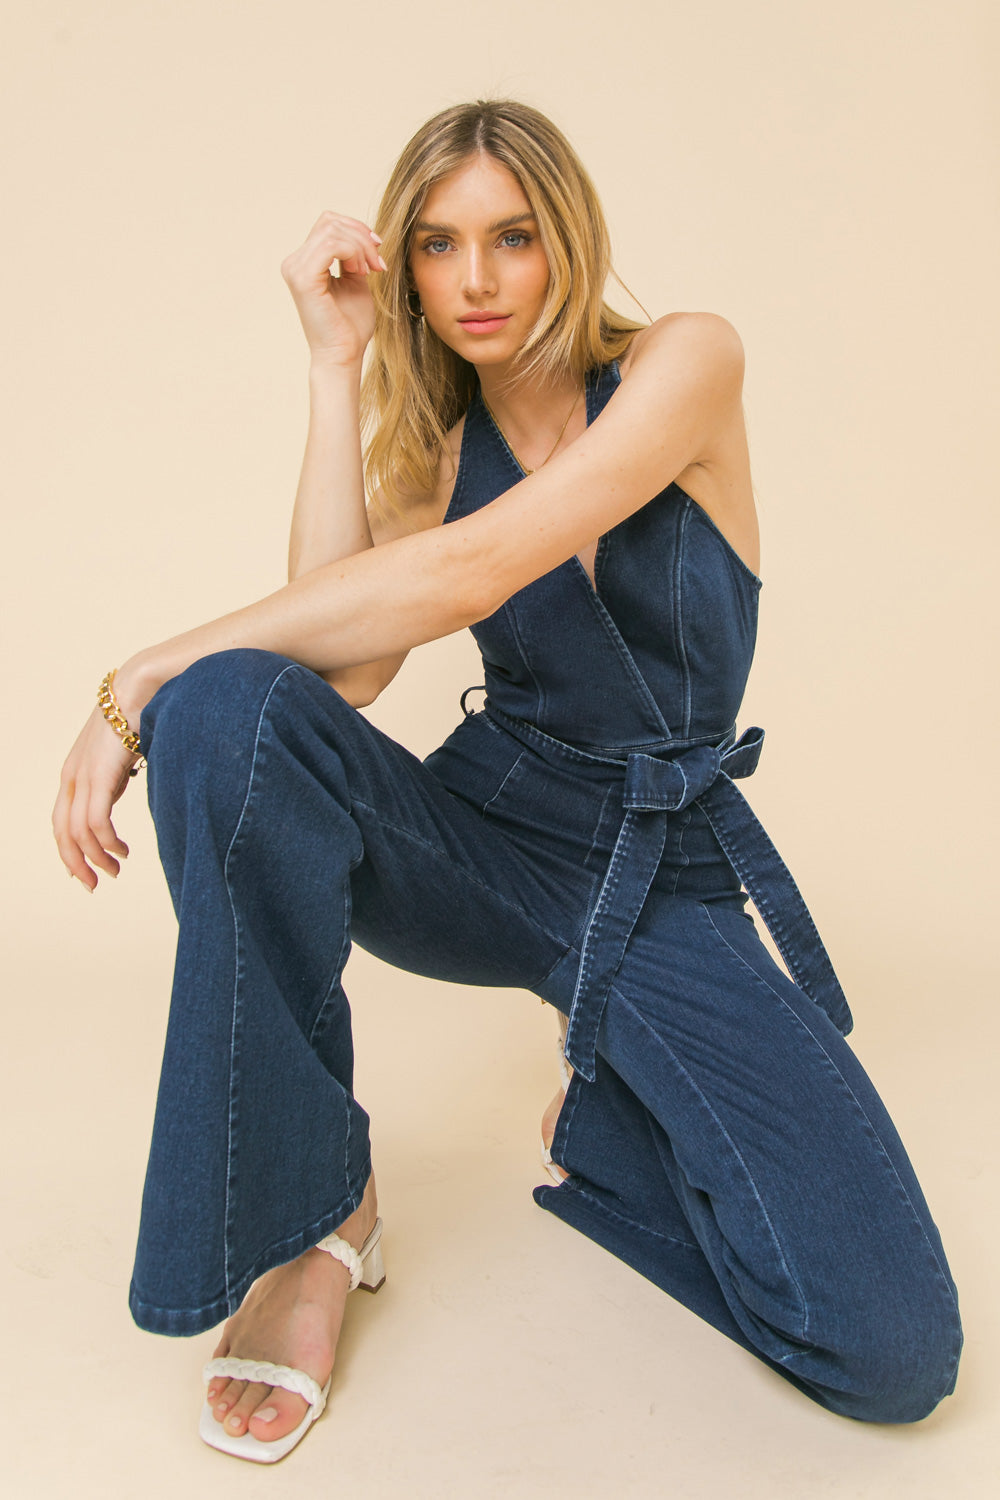 LOVED MY YOU DENIM JUMPSUIT